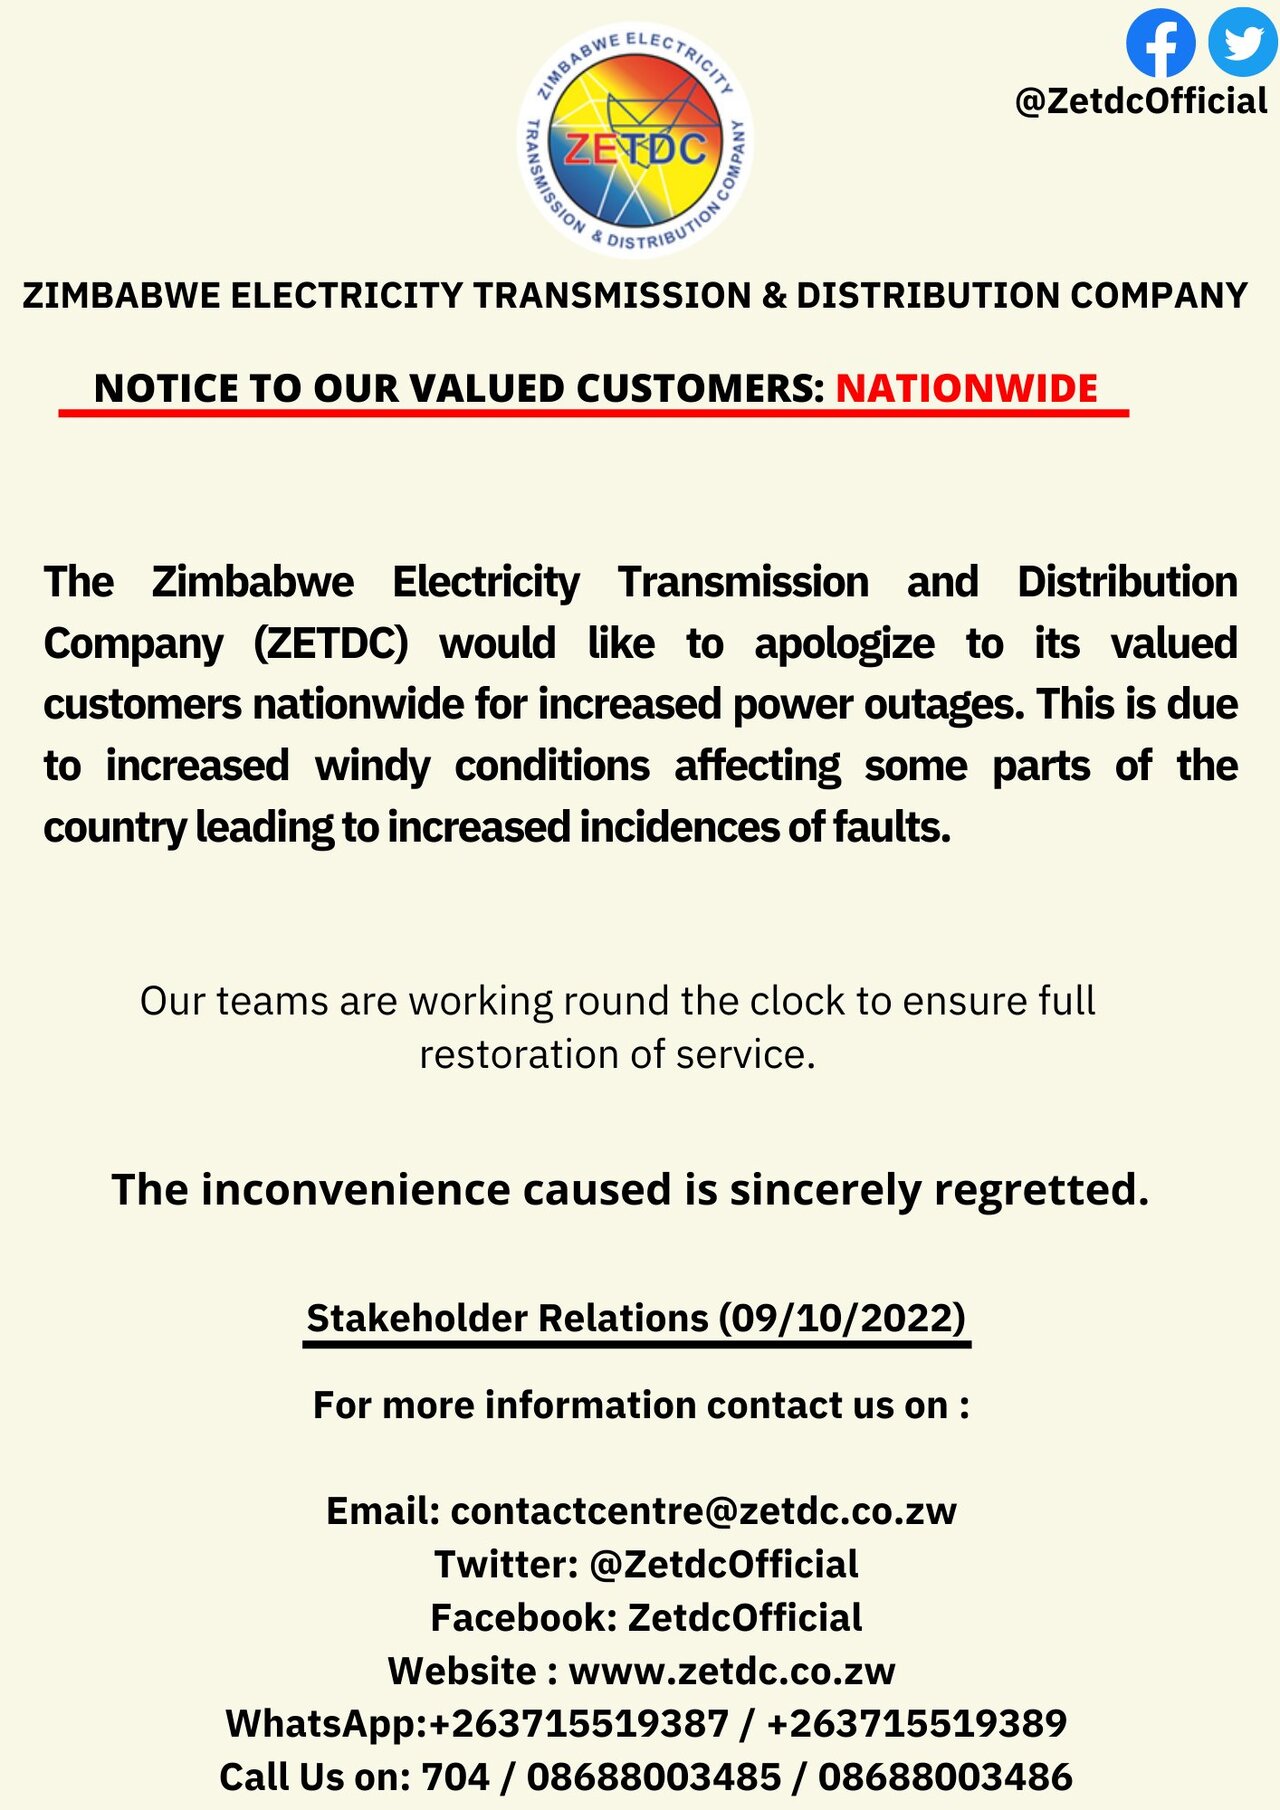 ZESA Blames The Wind For Increased Electricity Power Cuts